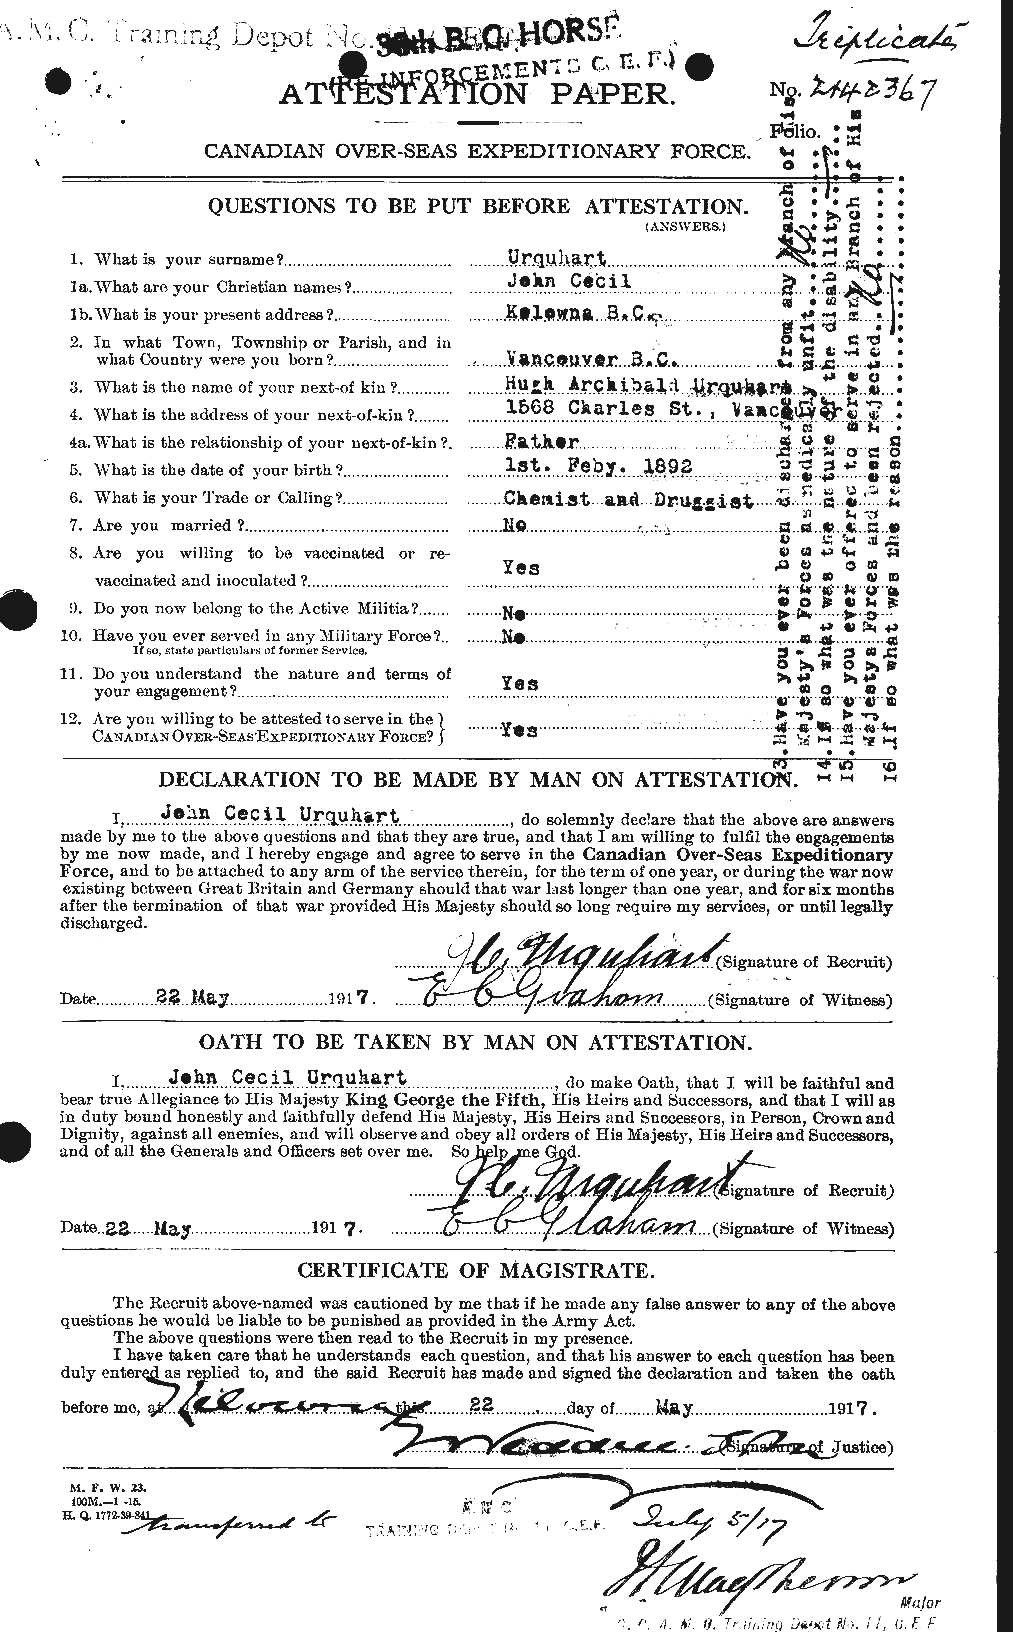 Personnel Records of the First World War - CEF 643371a